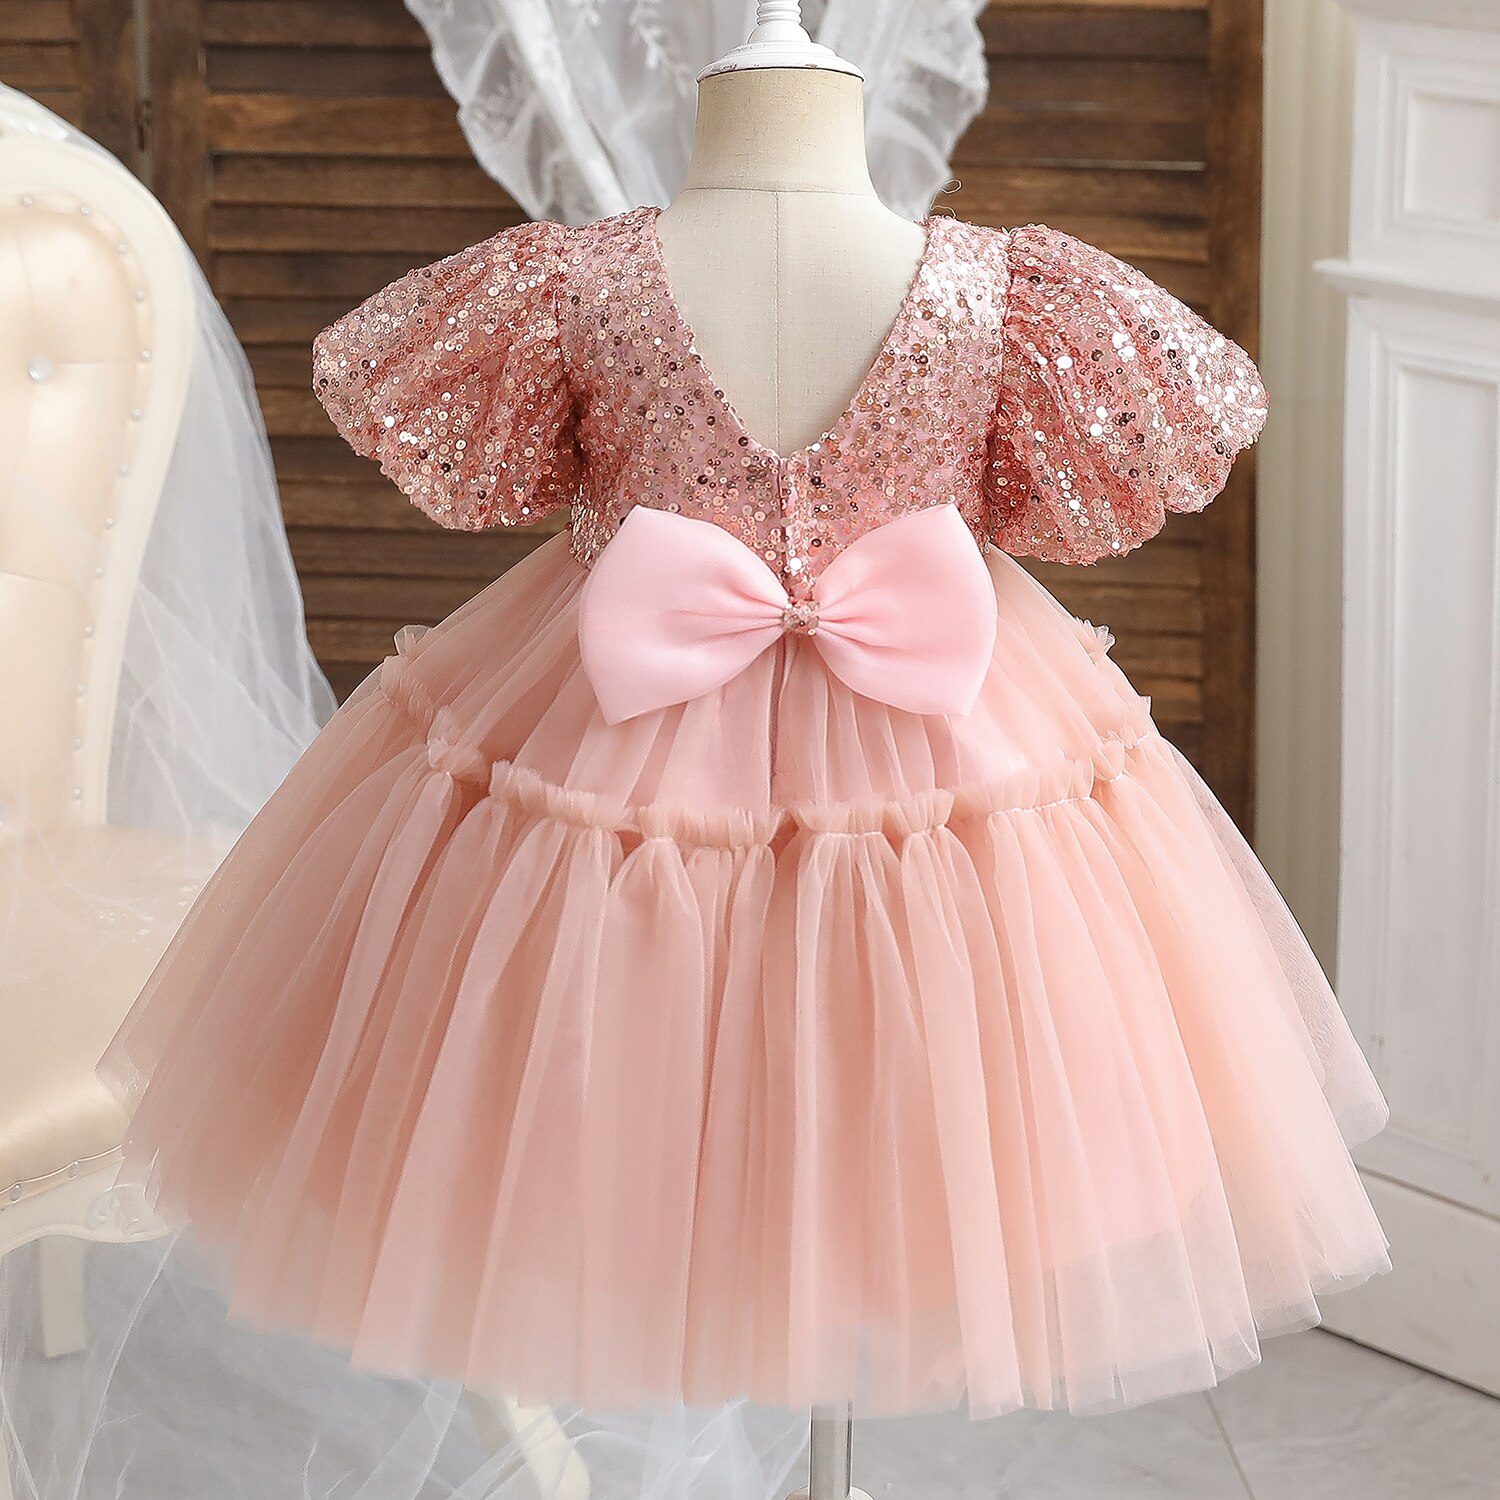 pink only dress 03